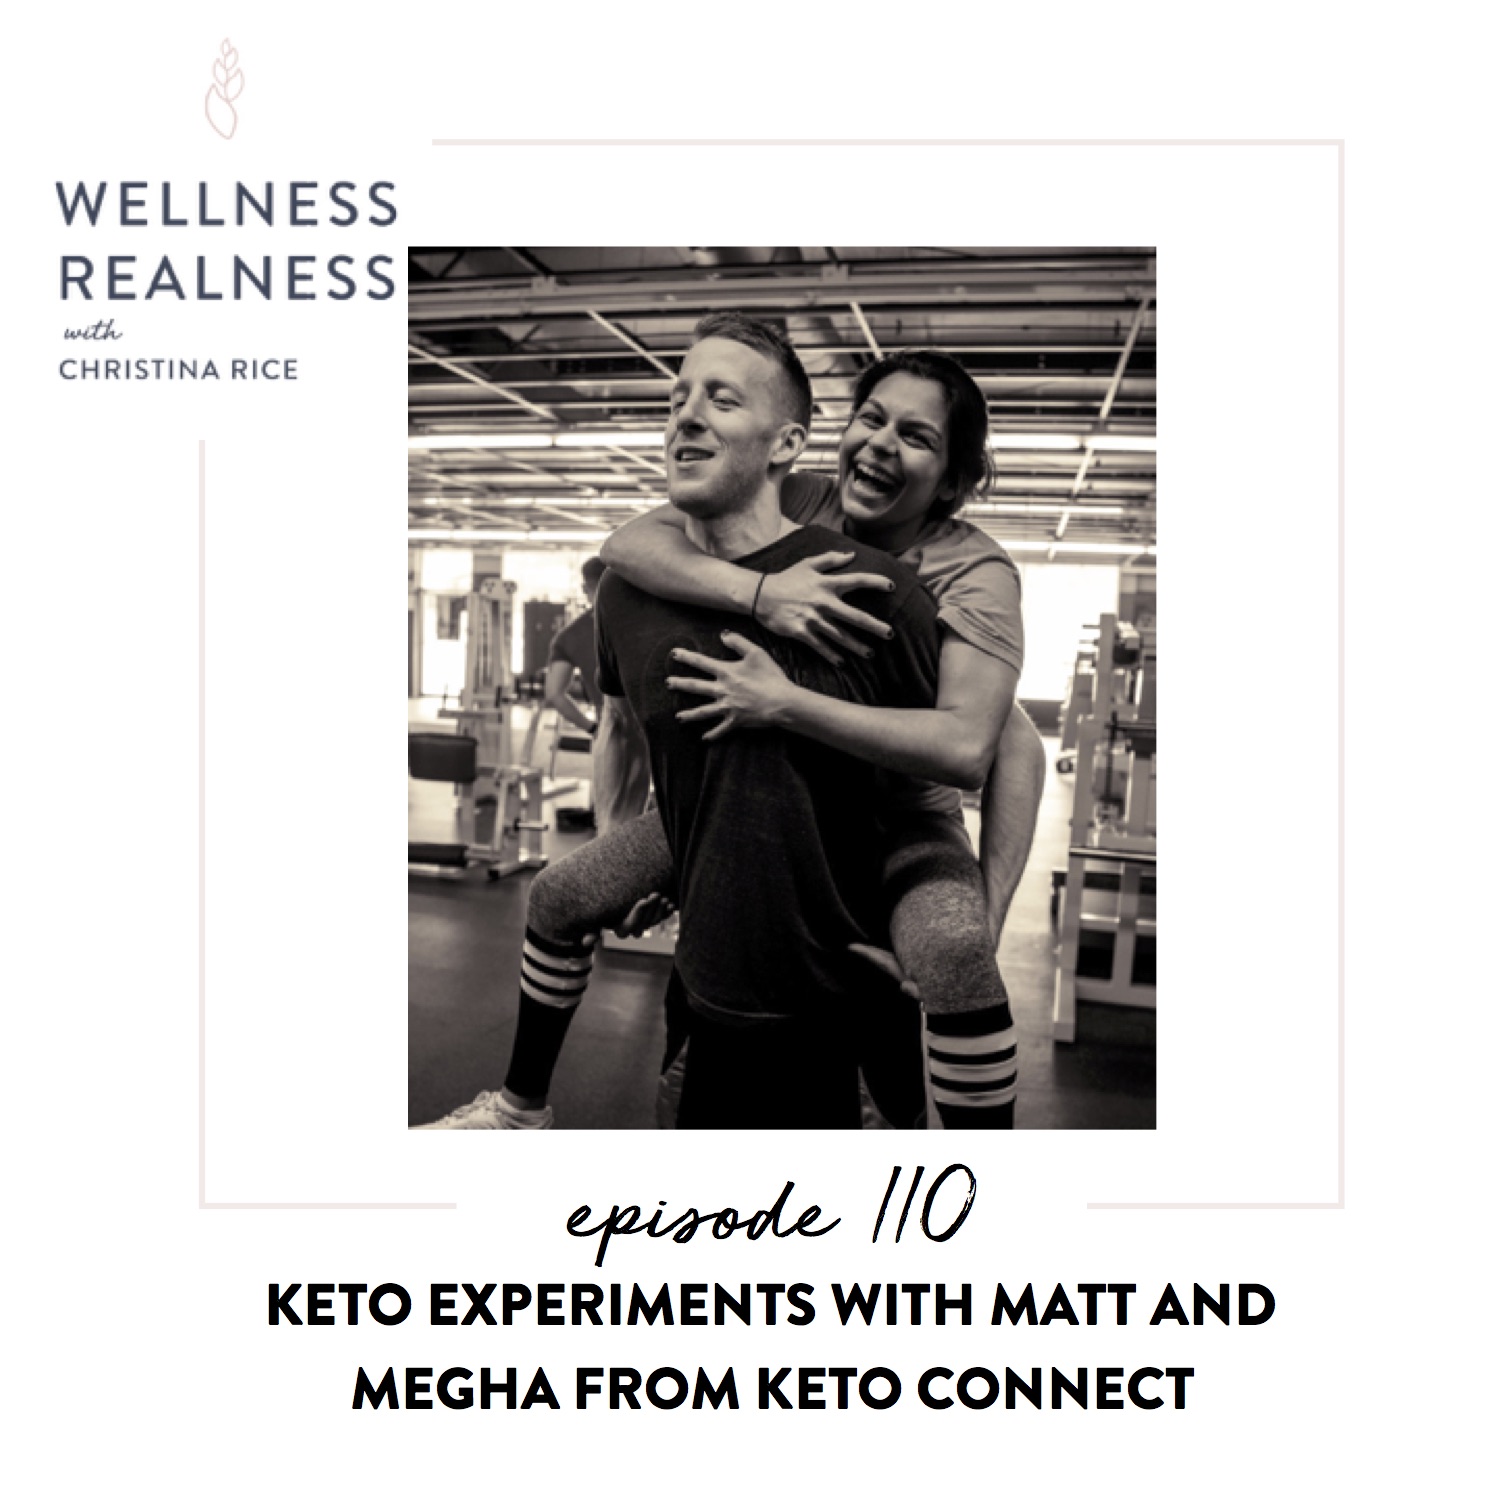 110: Keto Experiments with Matt and Megha from KetoConnect